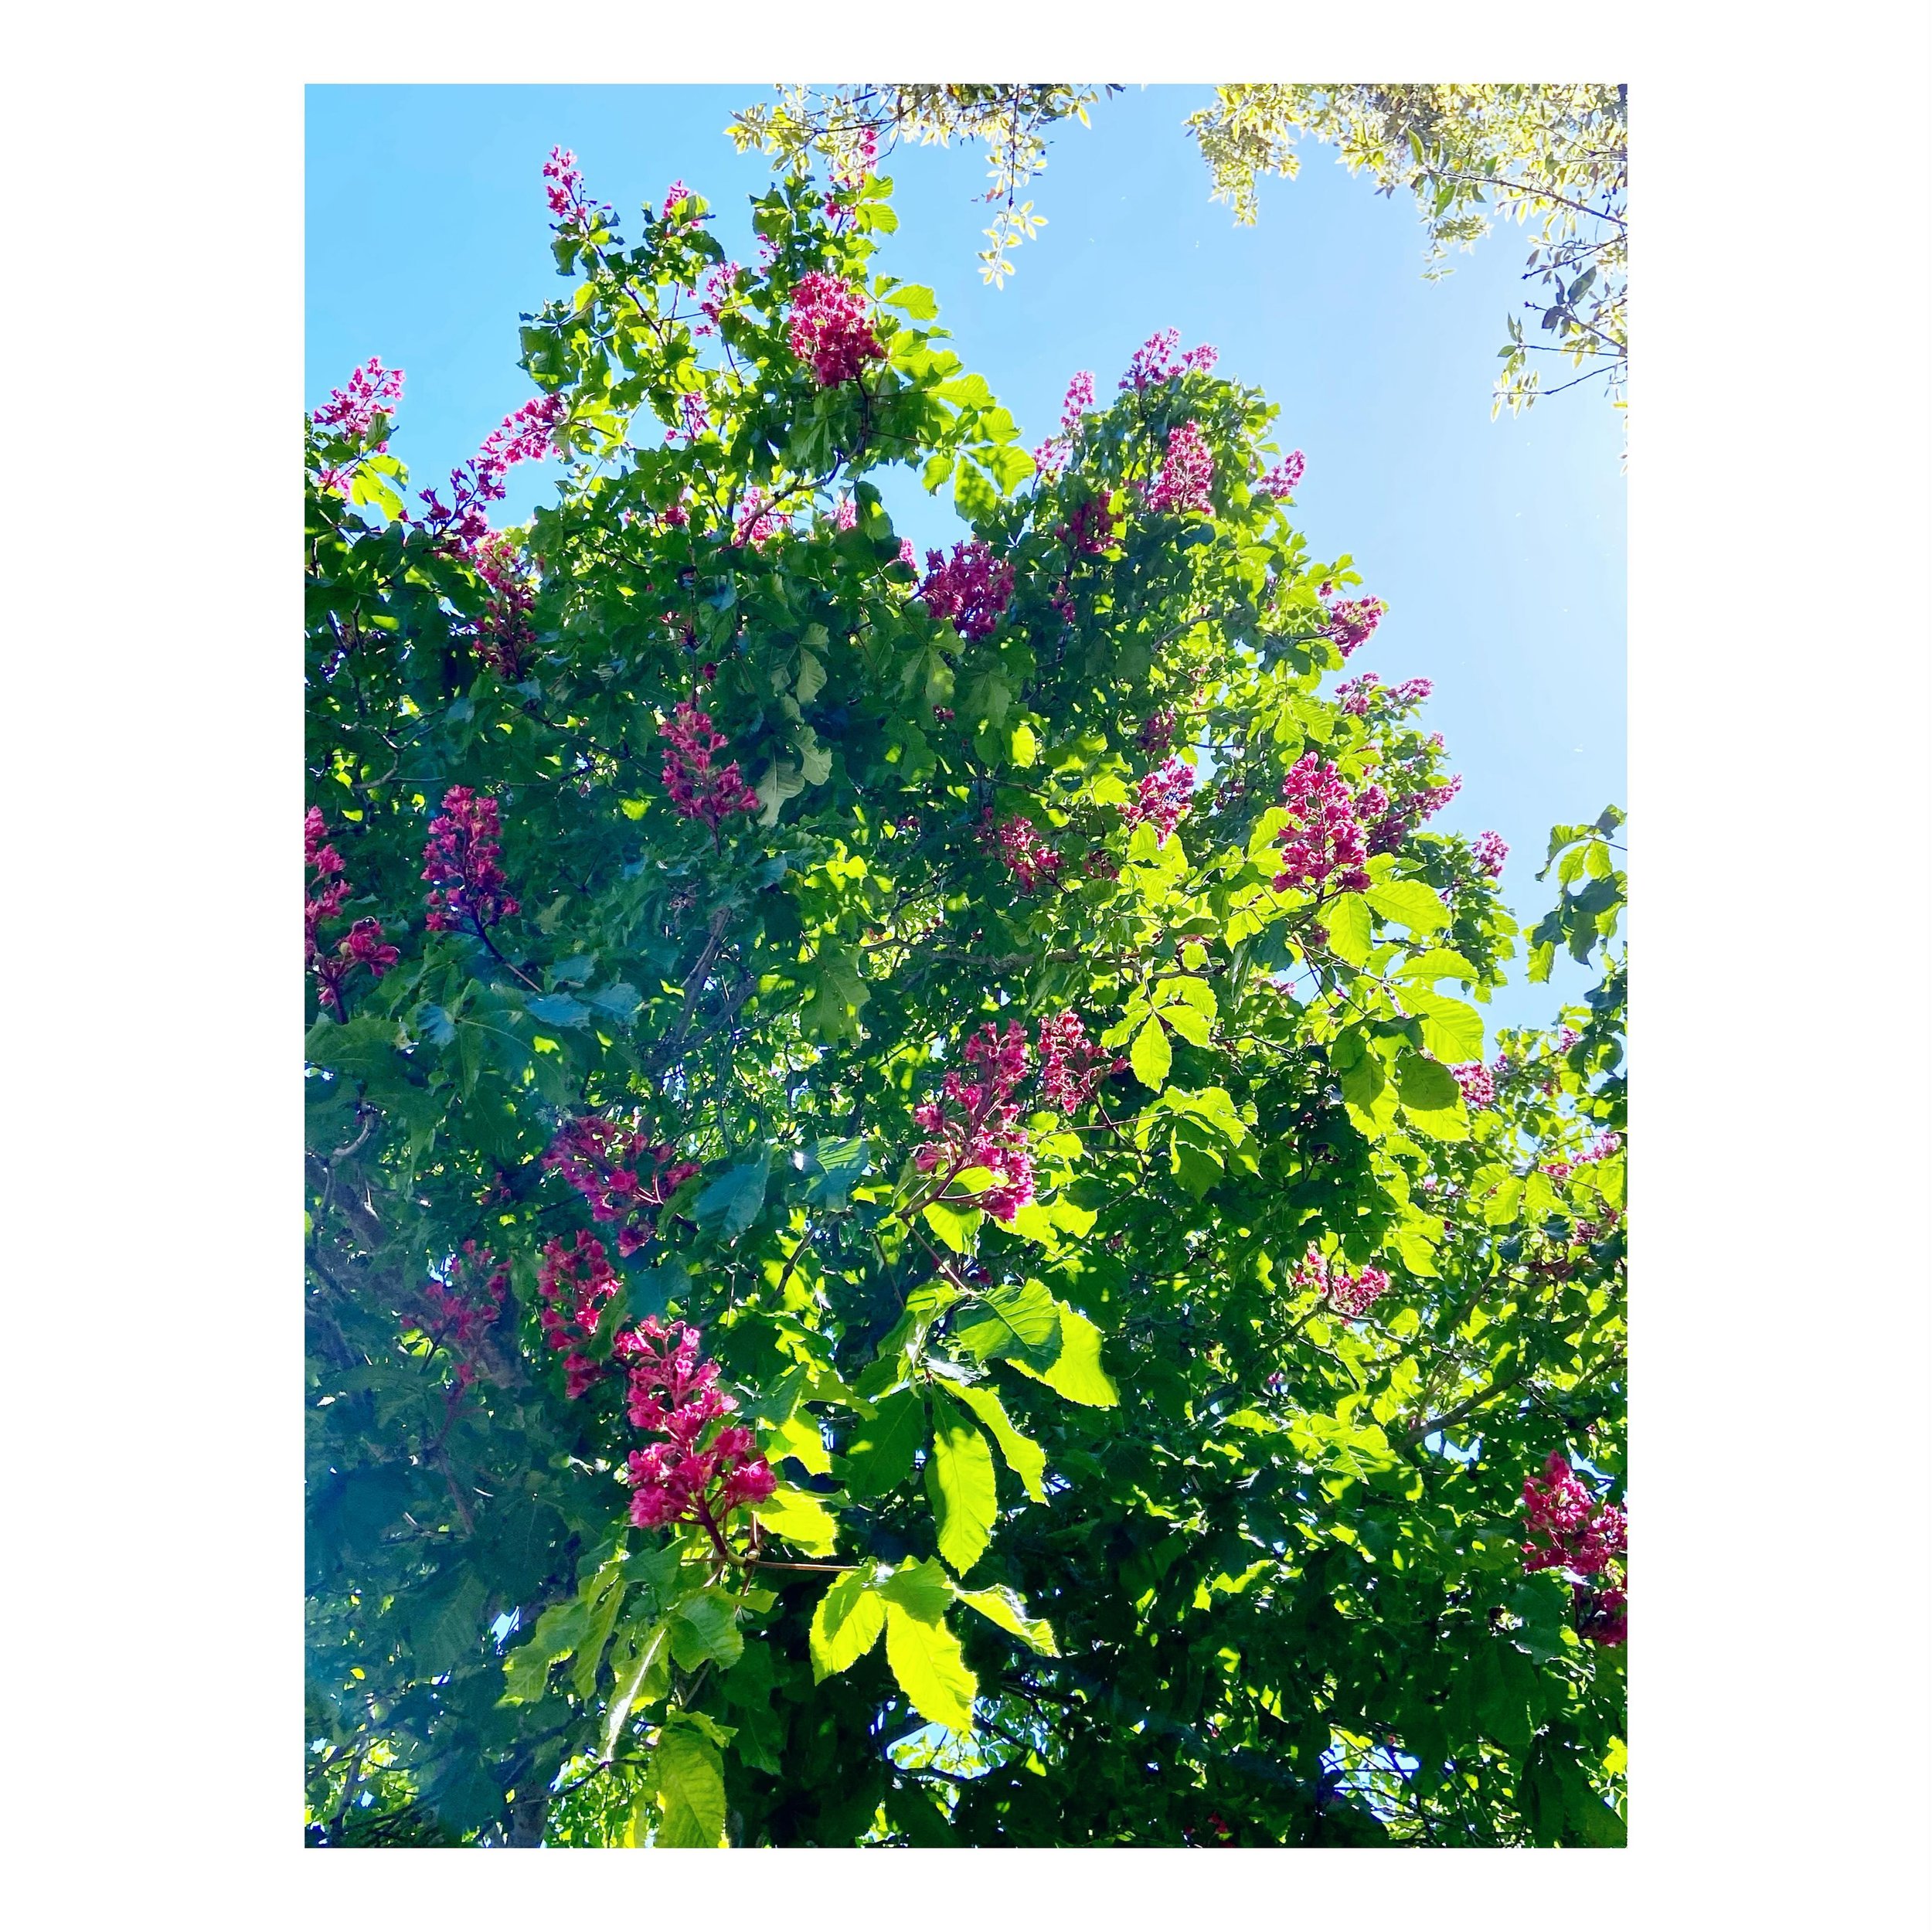 SUNNY SUNDAY 🎶

#nature #color #lookup